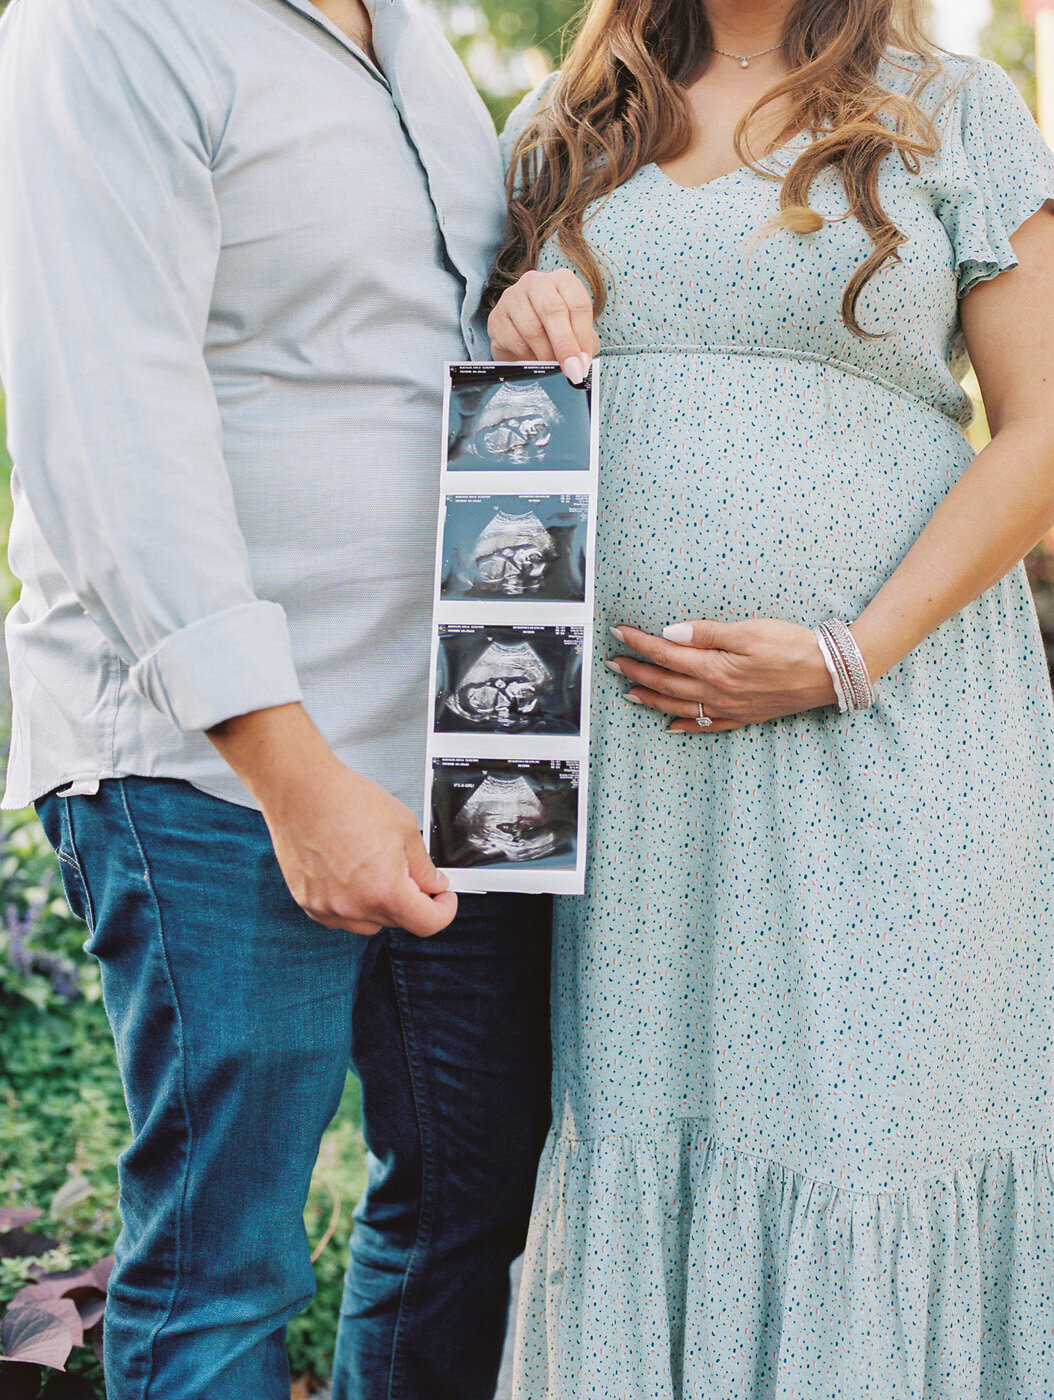 Raleigh Maternity Photographer | Jessica Agee Photography - 007